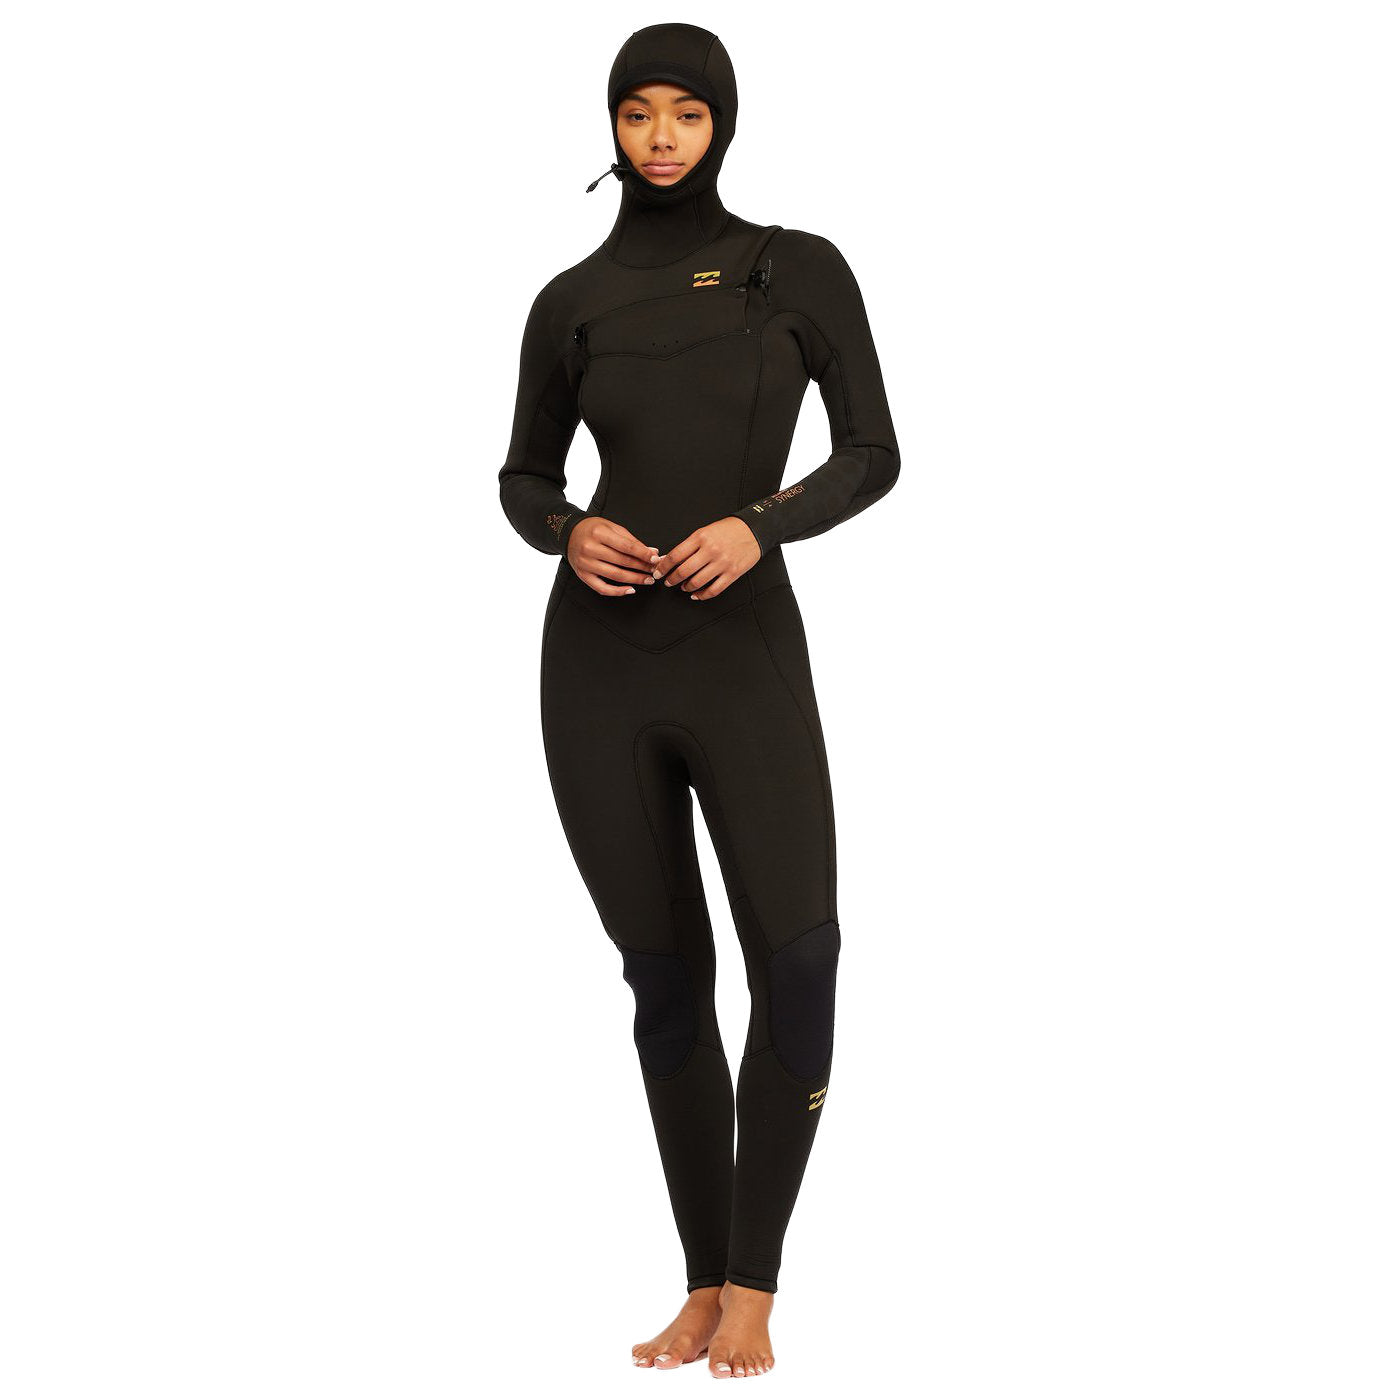 Sport WETSUITS - Synergy Wetsuits